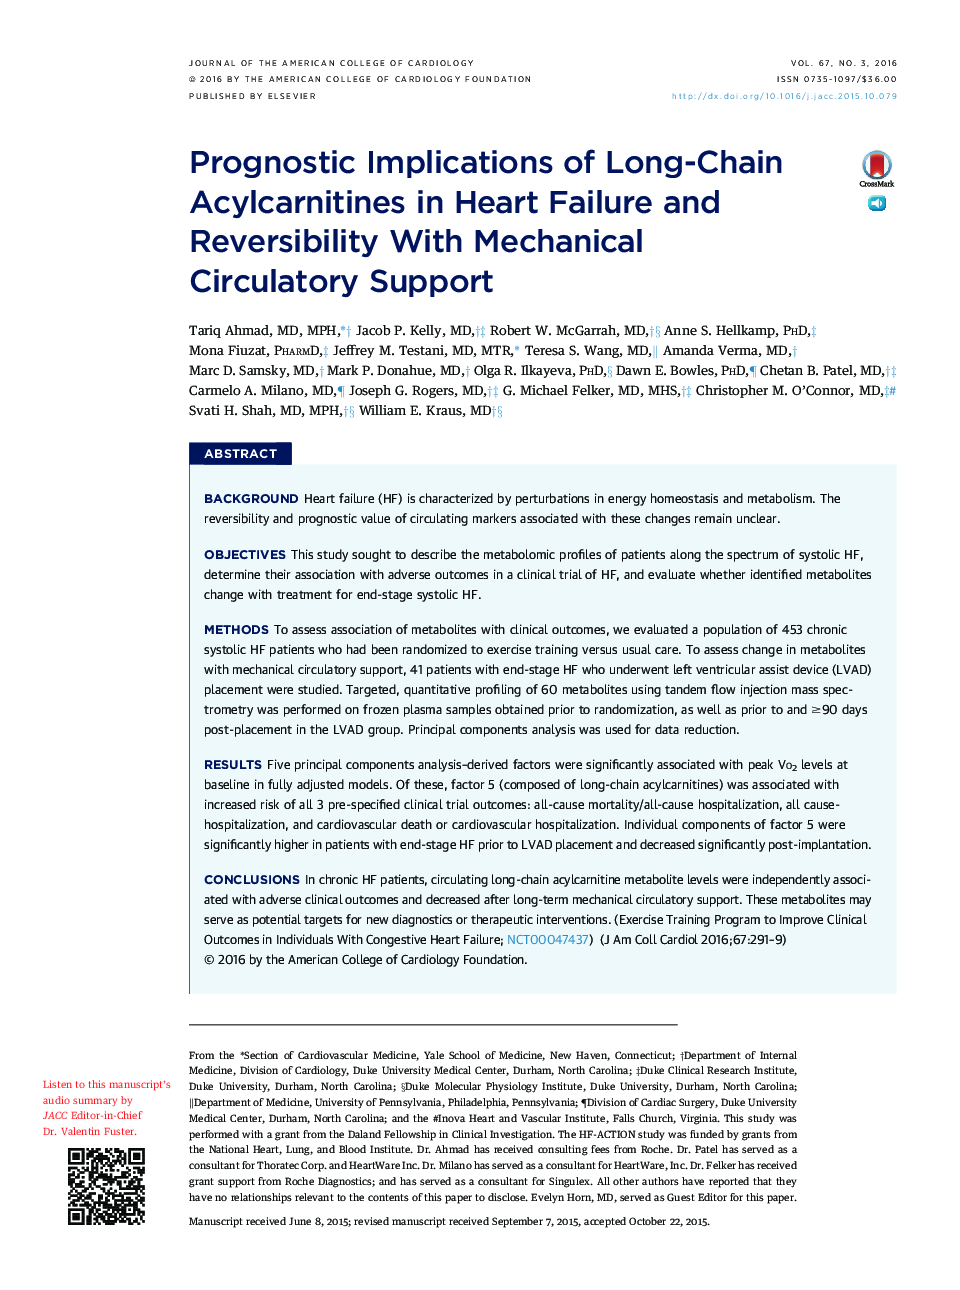 Prognostic Implications of Long-Chain Acylcarnitines in Heart Failure and Reversibility With Mechanical CirculatoryÂ Support